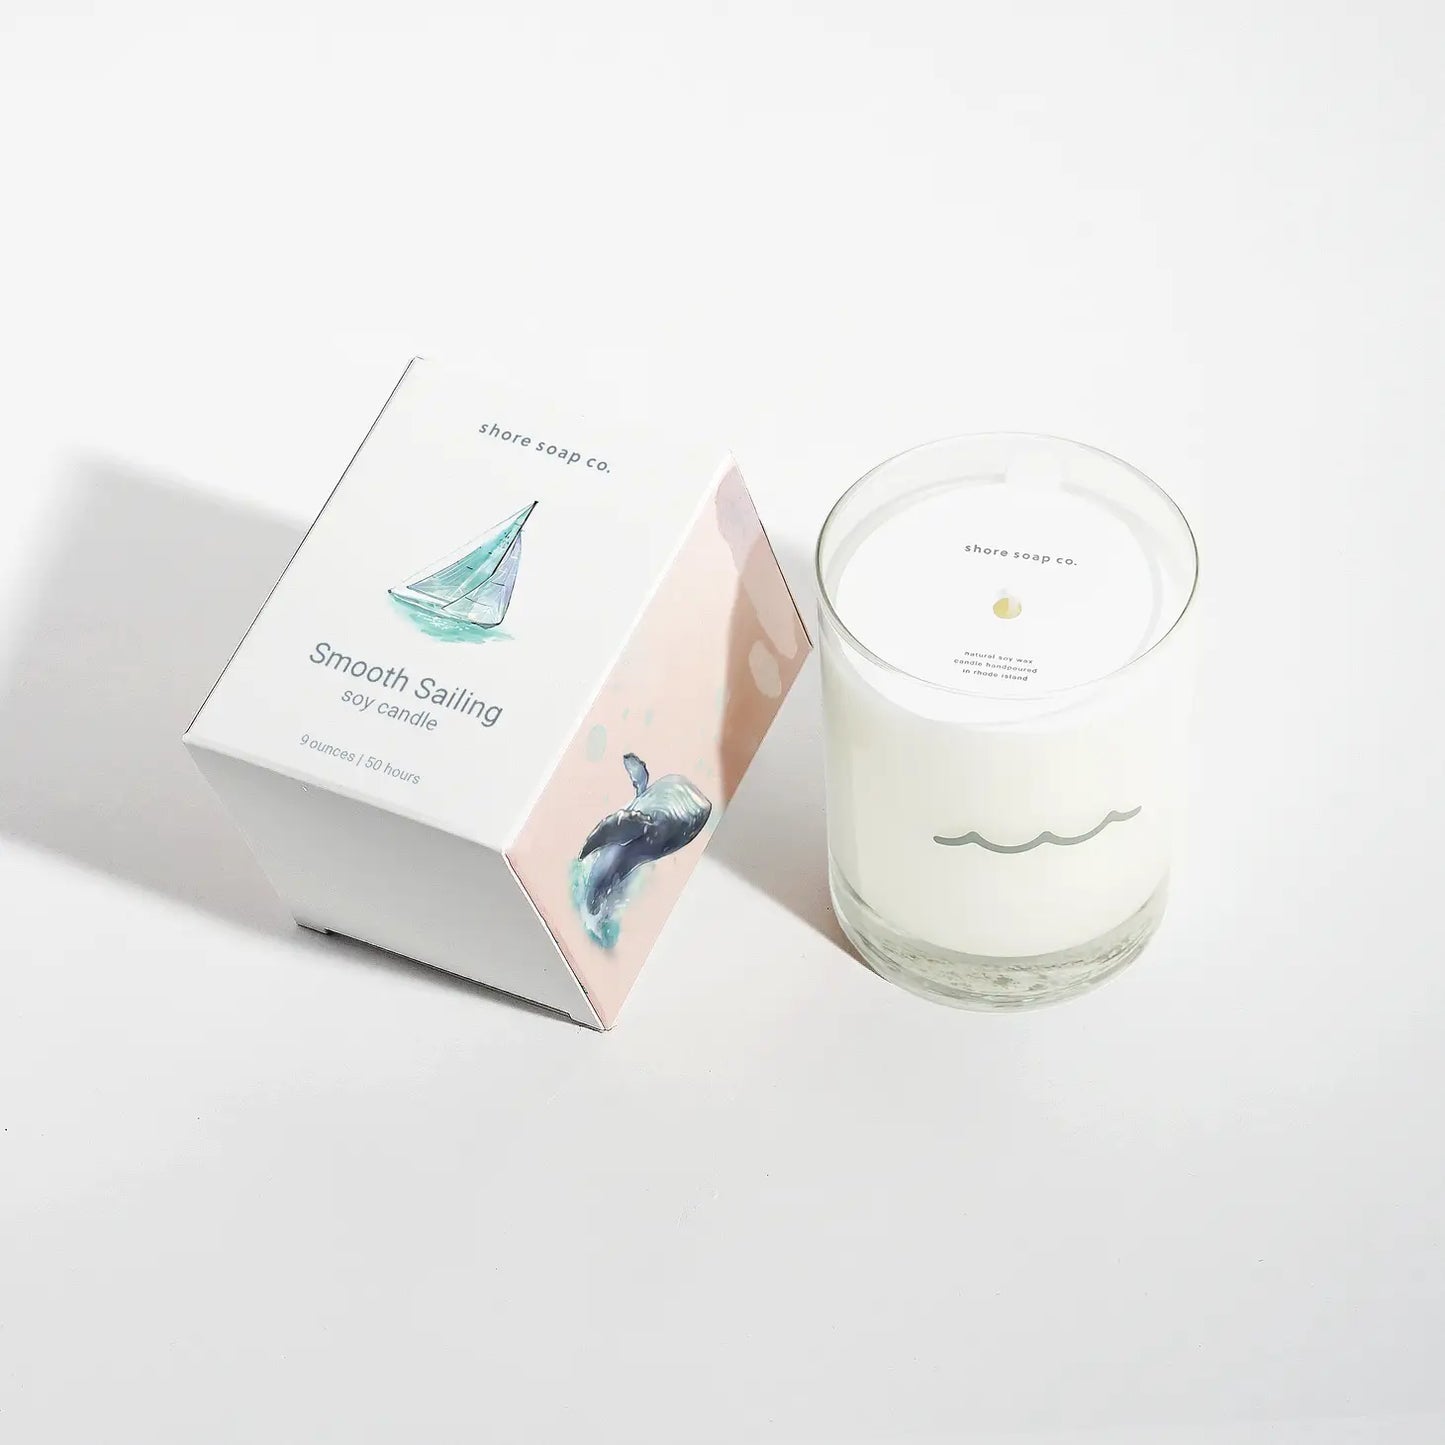 9oz soy candle in re-usable glass container sitting next to its box